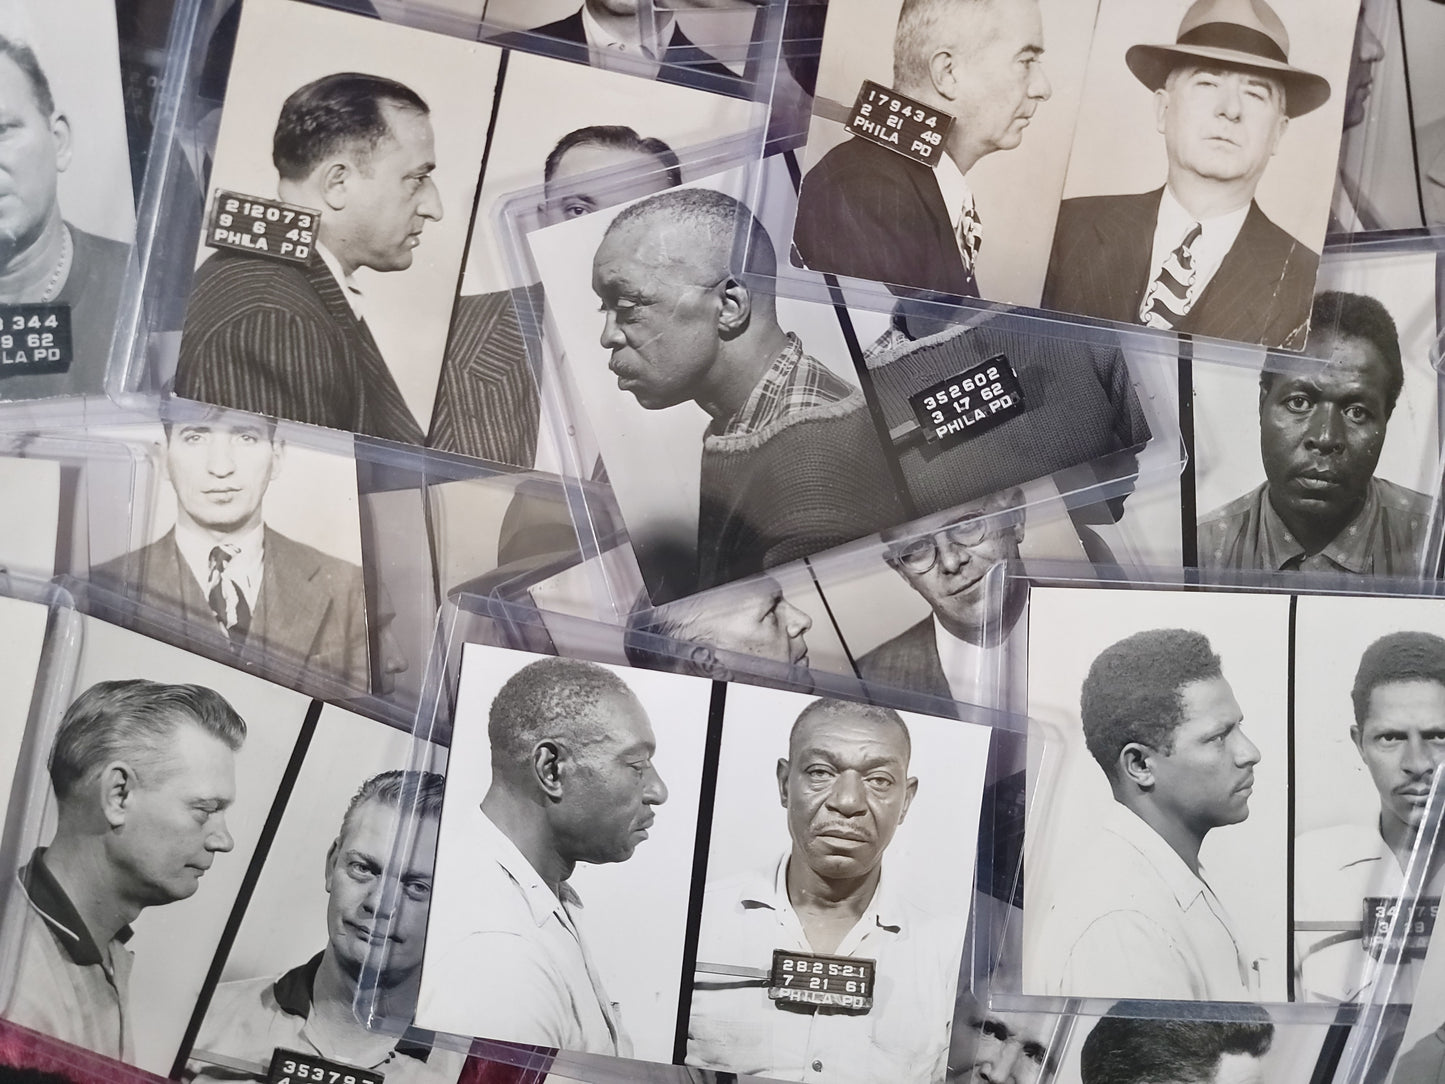 Original Mugshot Photos of Greasers & Gamblers with Arrest Records, 1940s-1960s